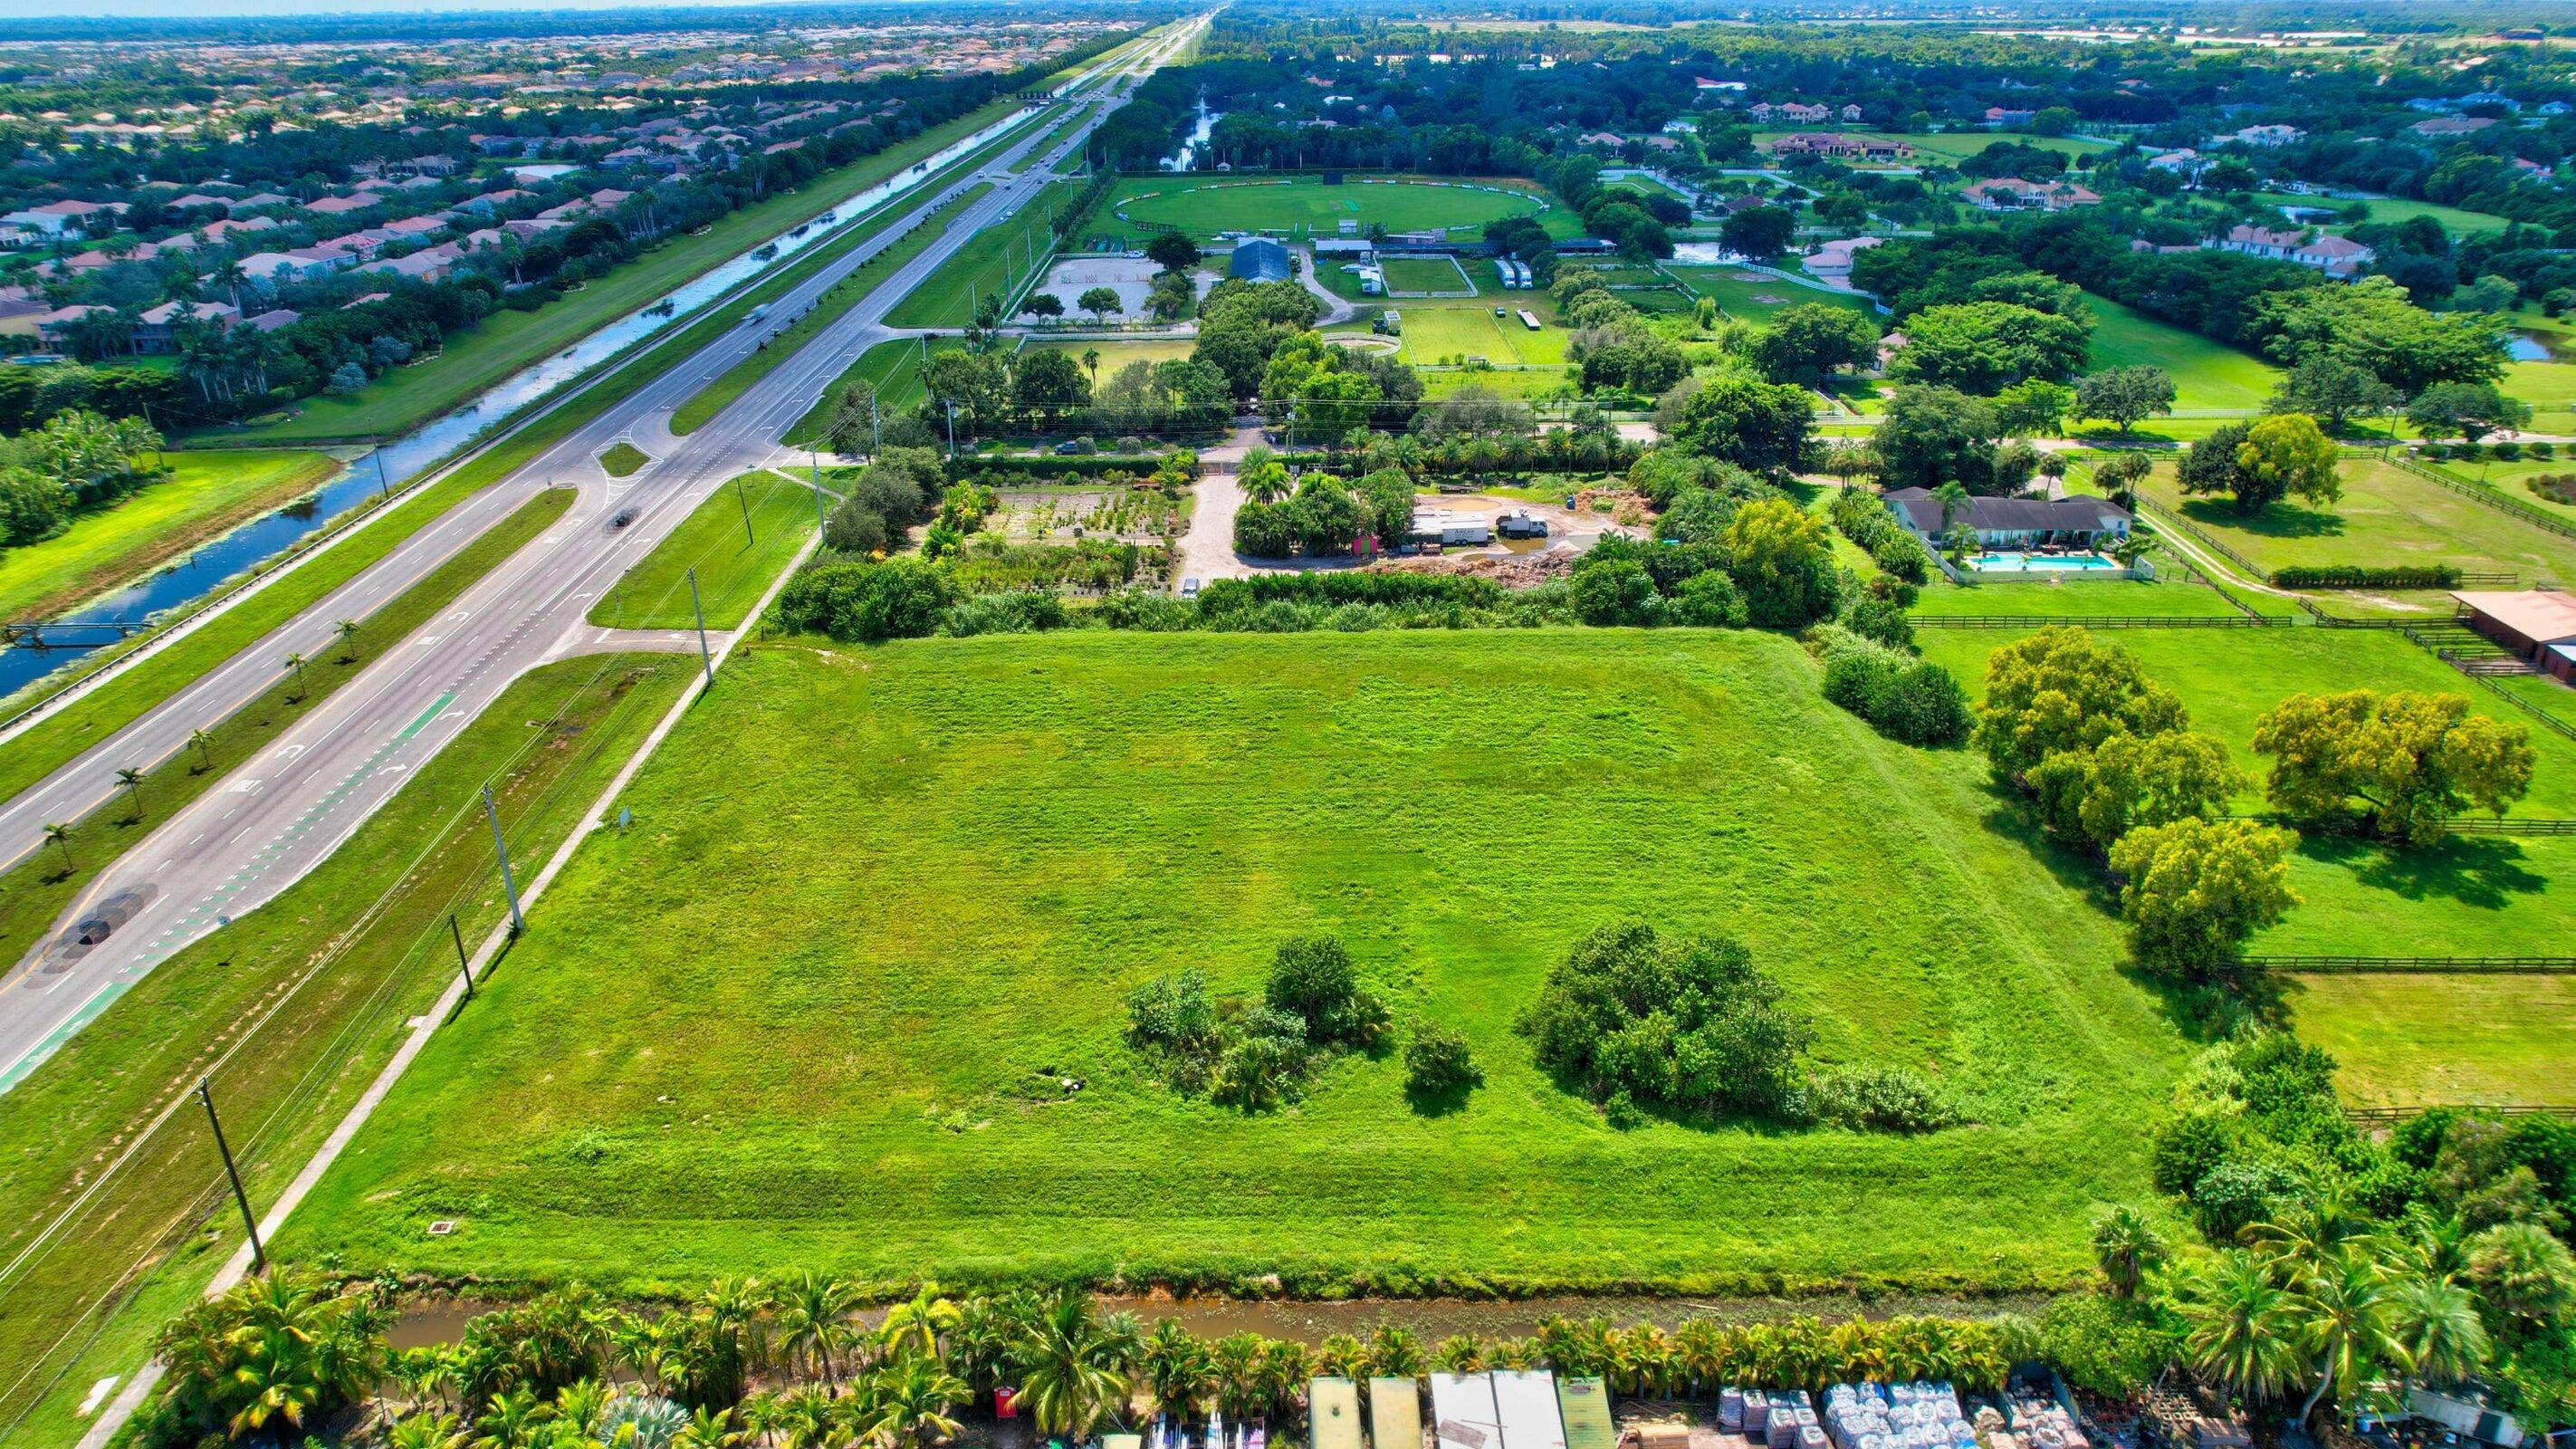 3. 63 acres of prime agricultural land available for sale, located in what is undoubtedly one of the best locations in Delray Beach, right on 441.